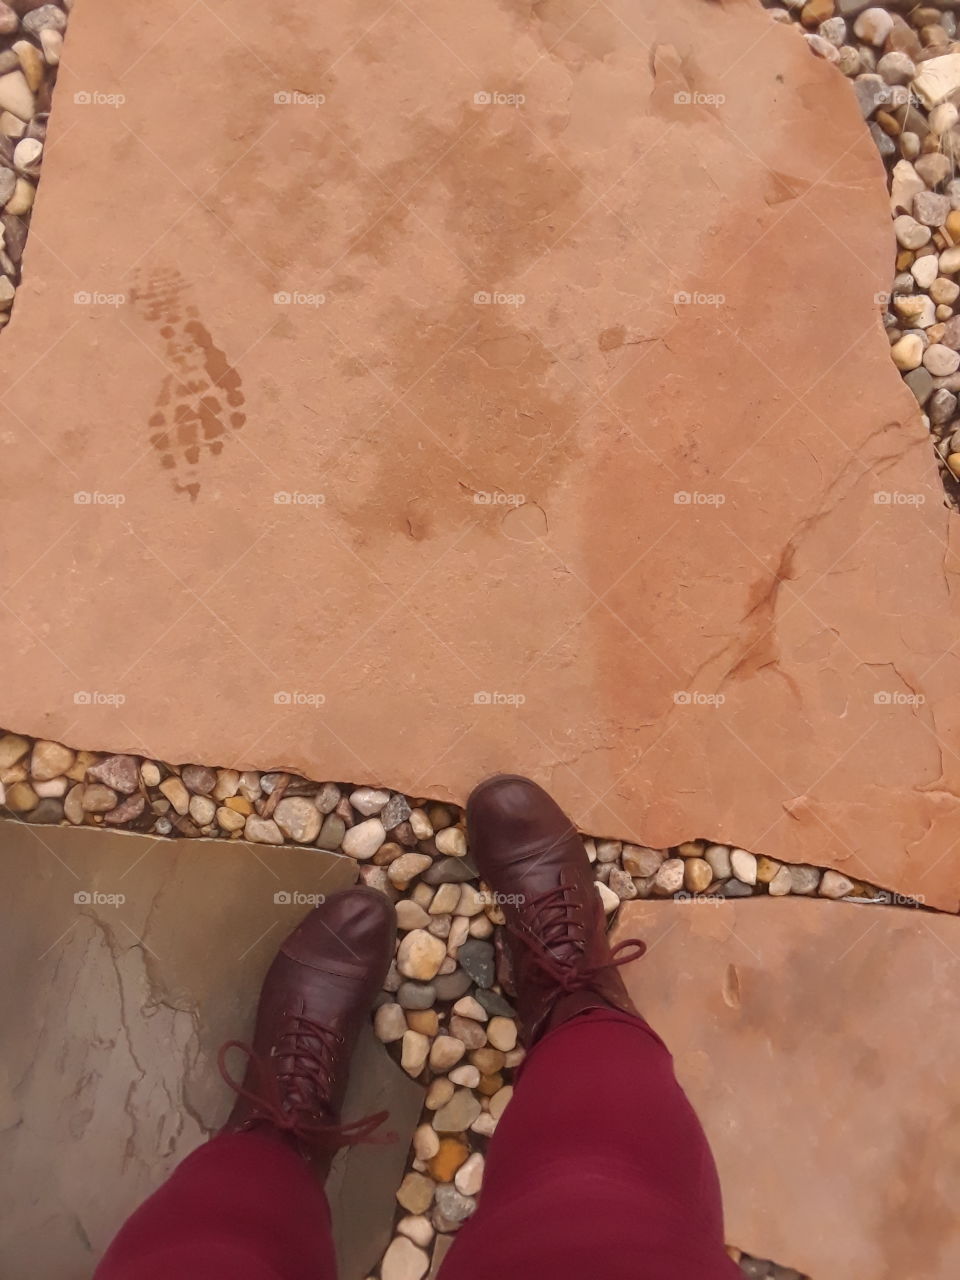 downward looking image of brown combat boots with red pants walking along an orange large stone pathway